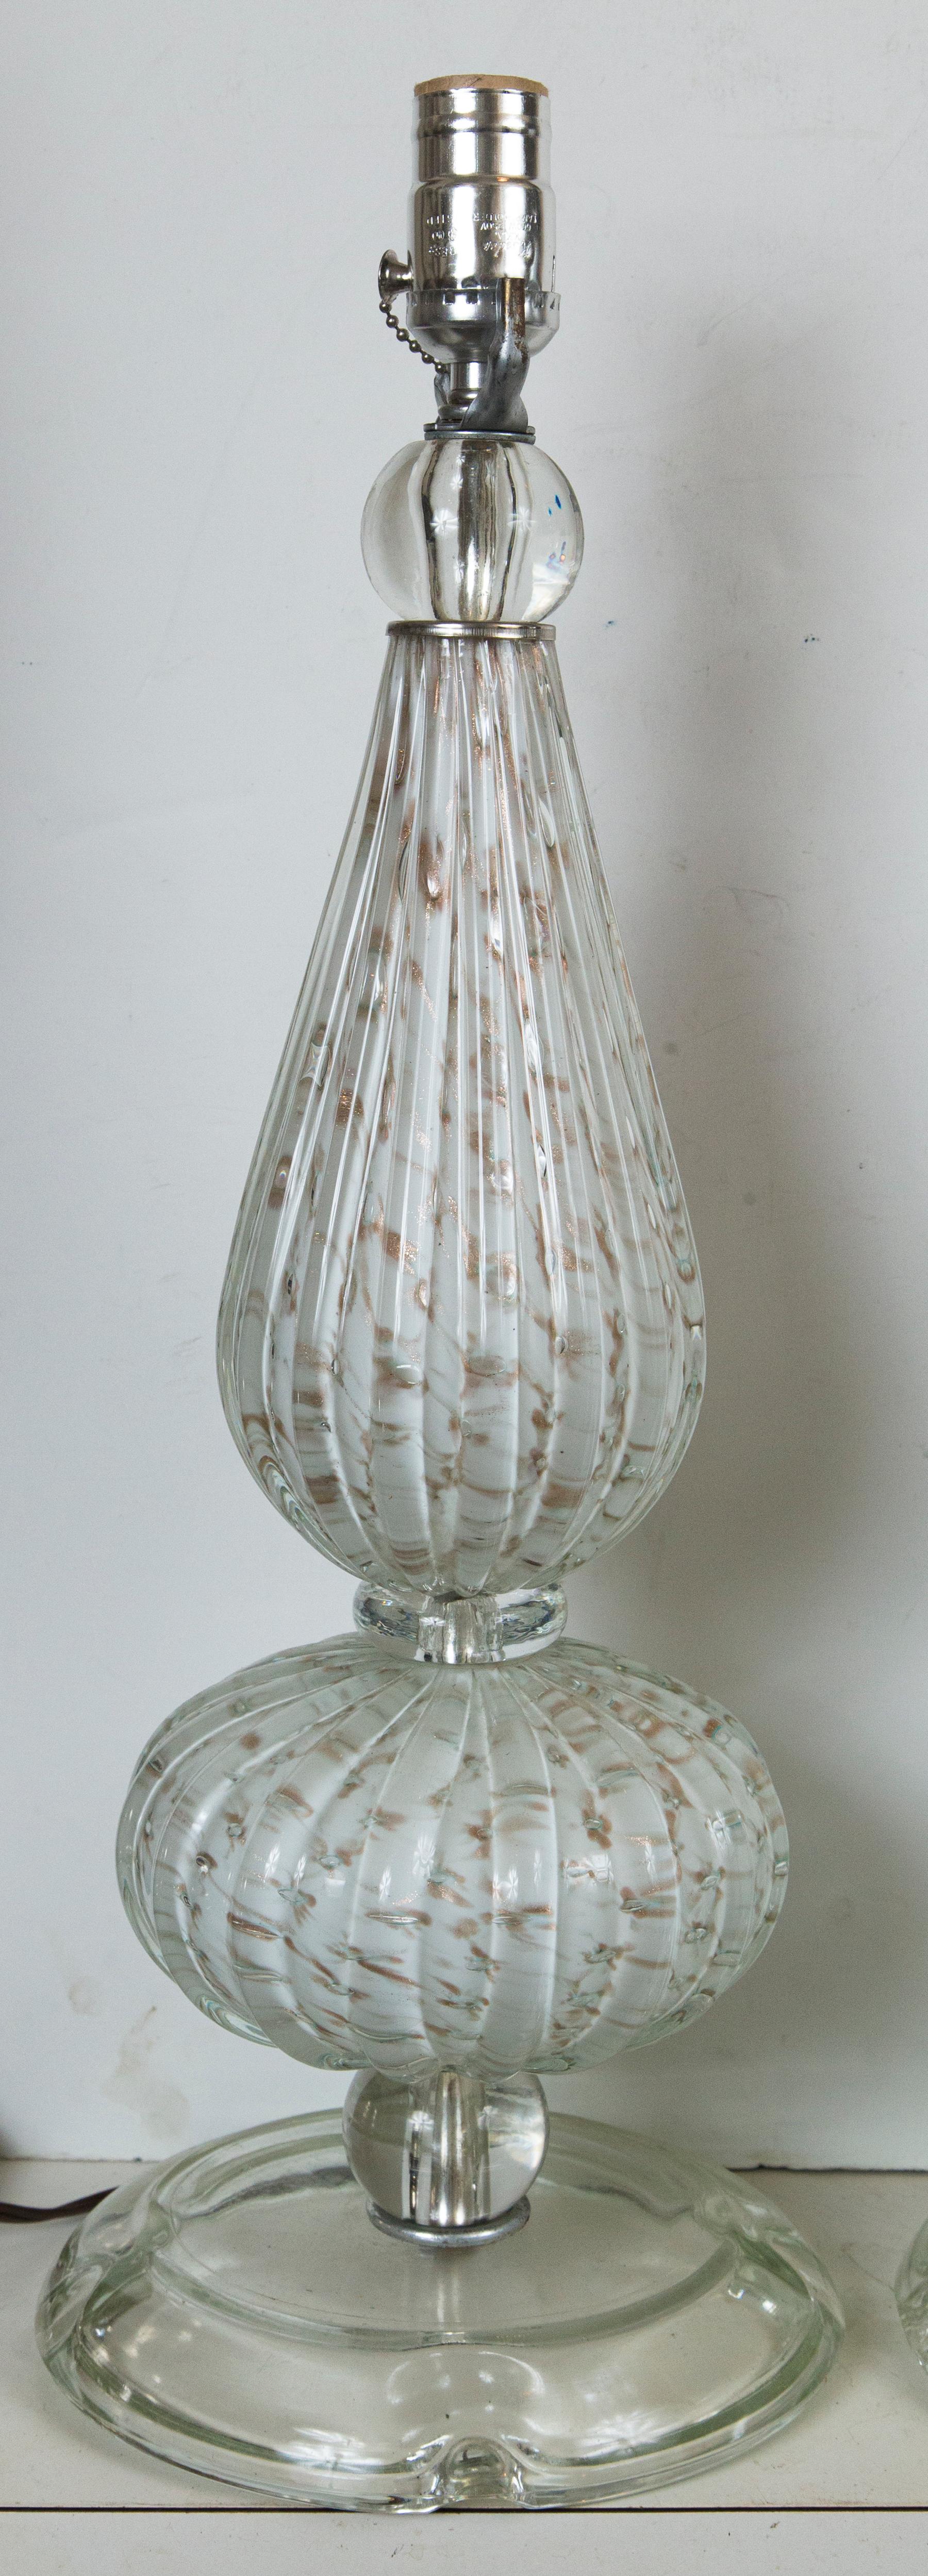 Pair of Murano Glass Style Table Lamps In Excellent Condition For Sale In Woodbury, CT